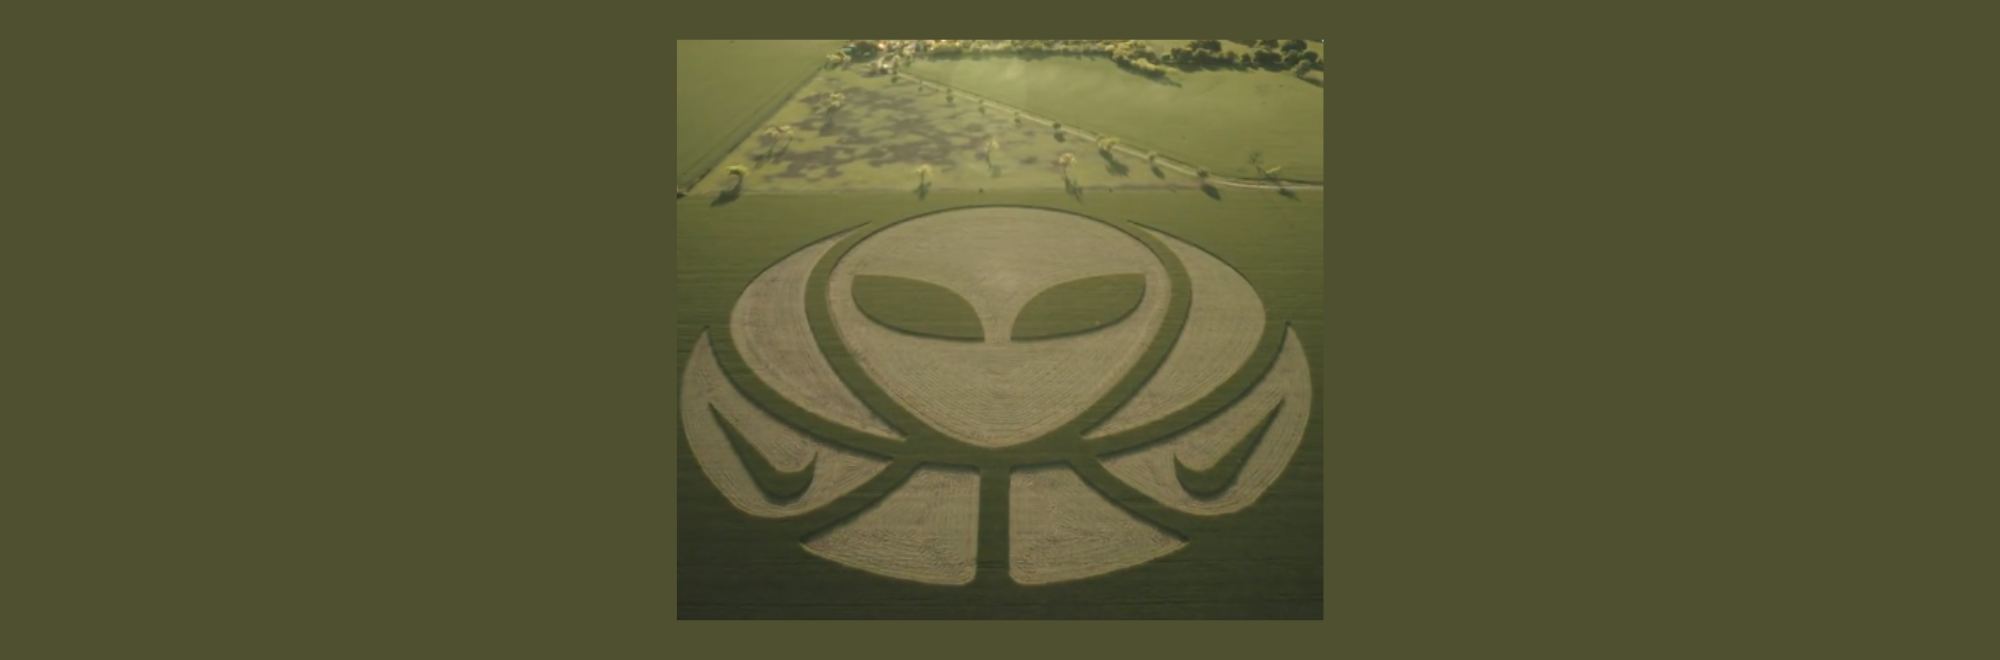 Nike teases 'Wemby' logo in alien basketball crop circle